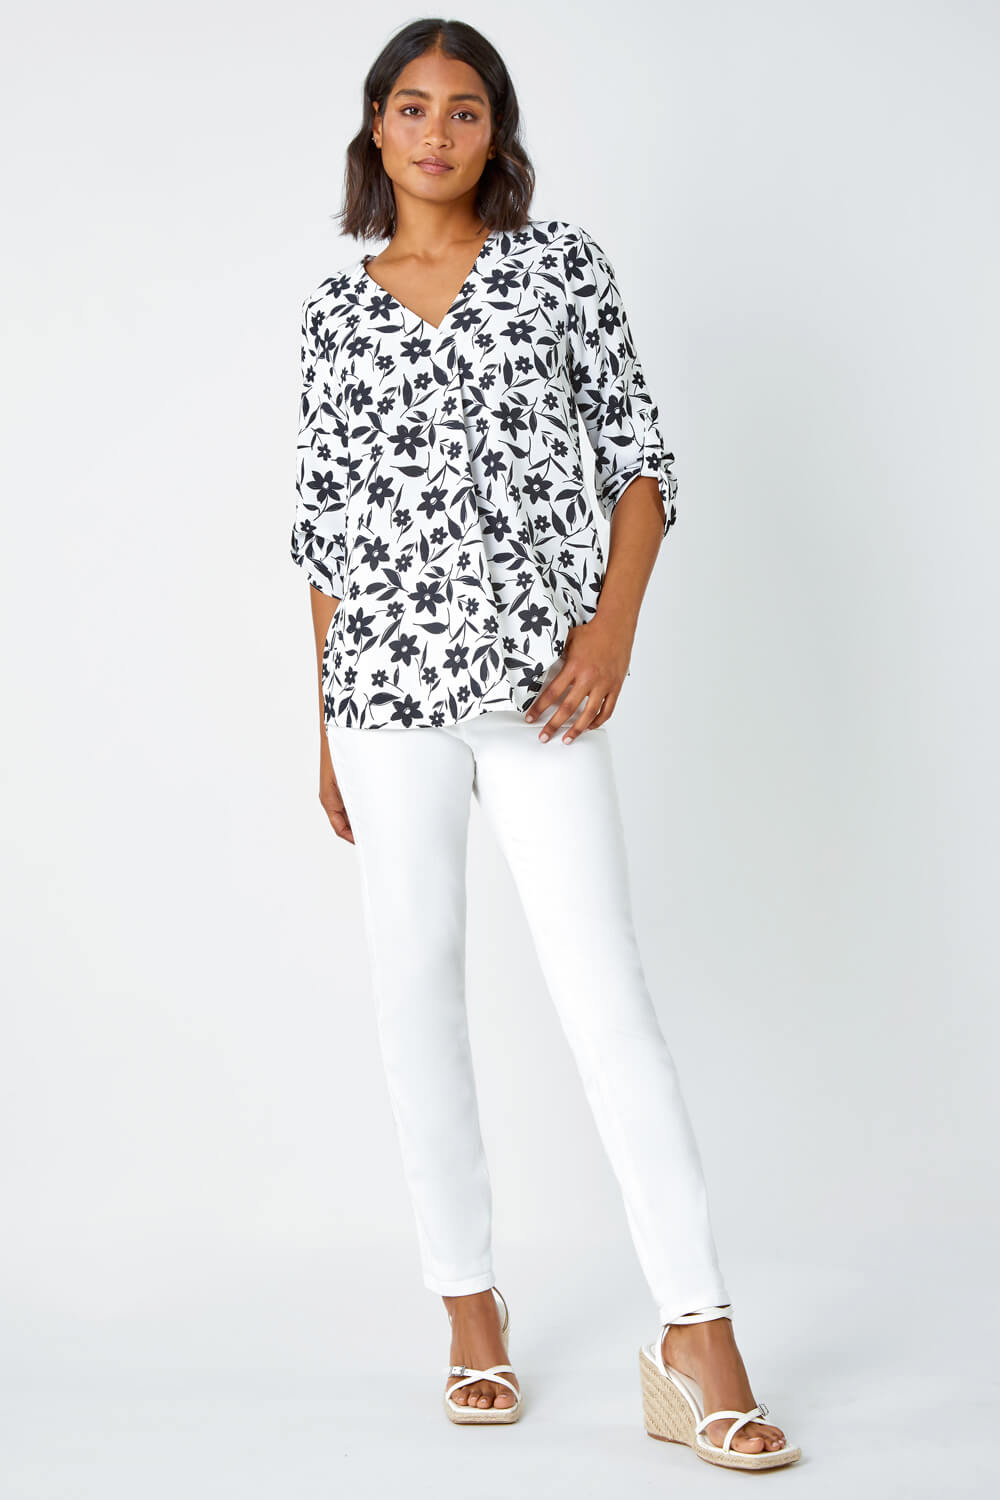 Black Floral Print Pleat Front Tunic Top, Image 2 of 5